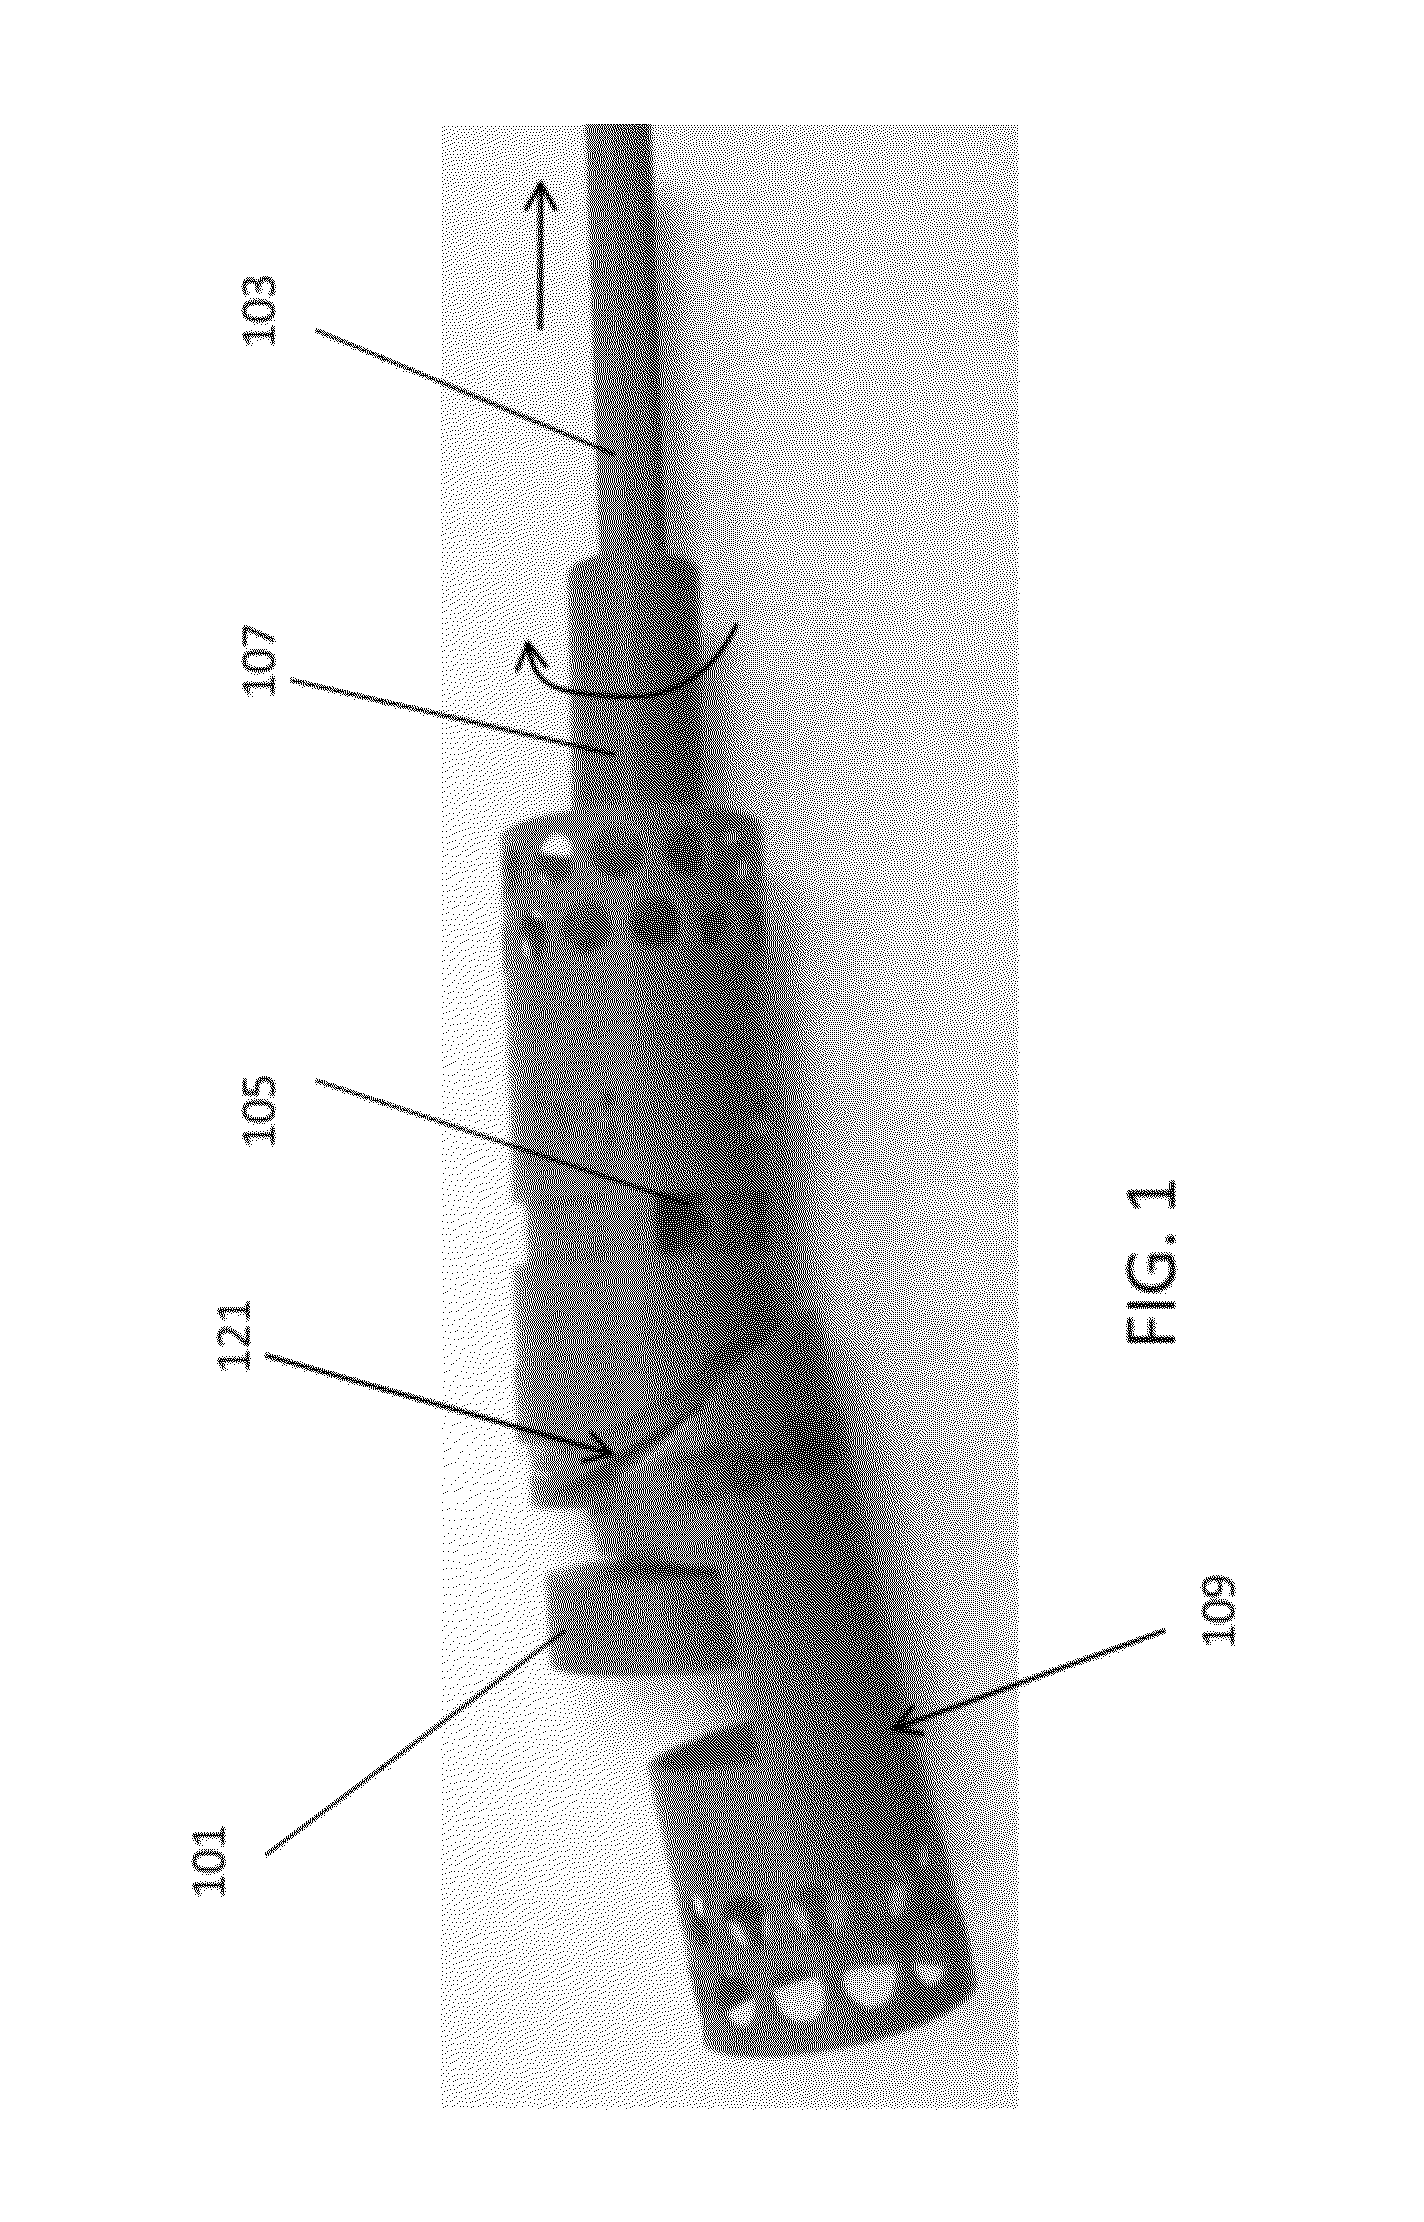 Atherectomy catheters with longitudinally displaceable drive shafts